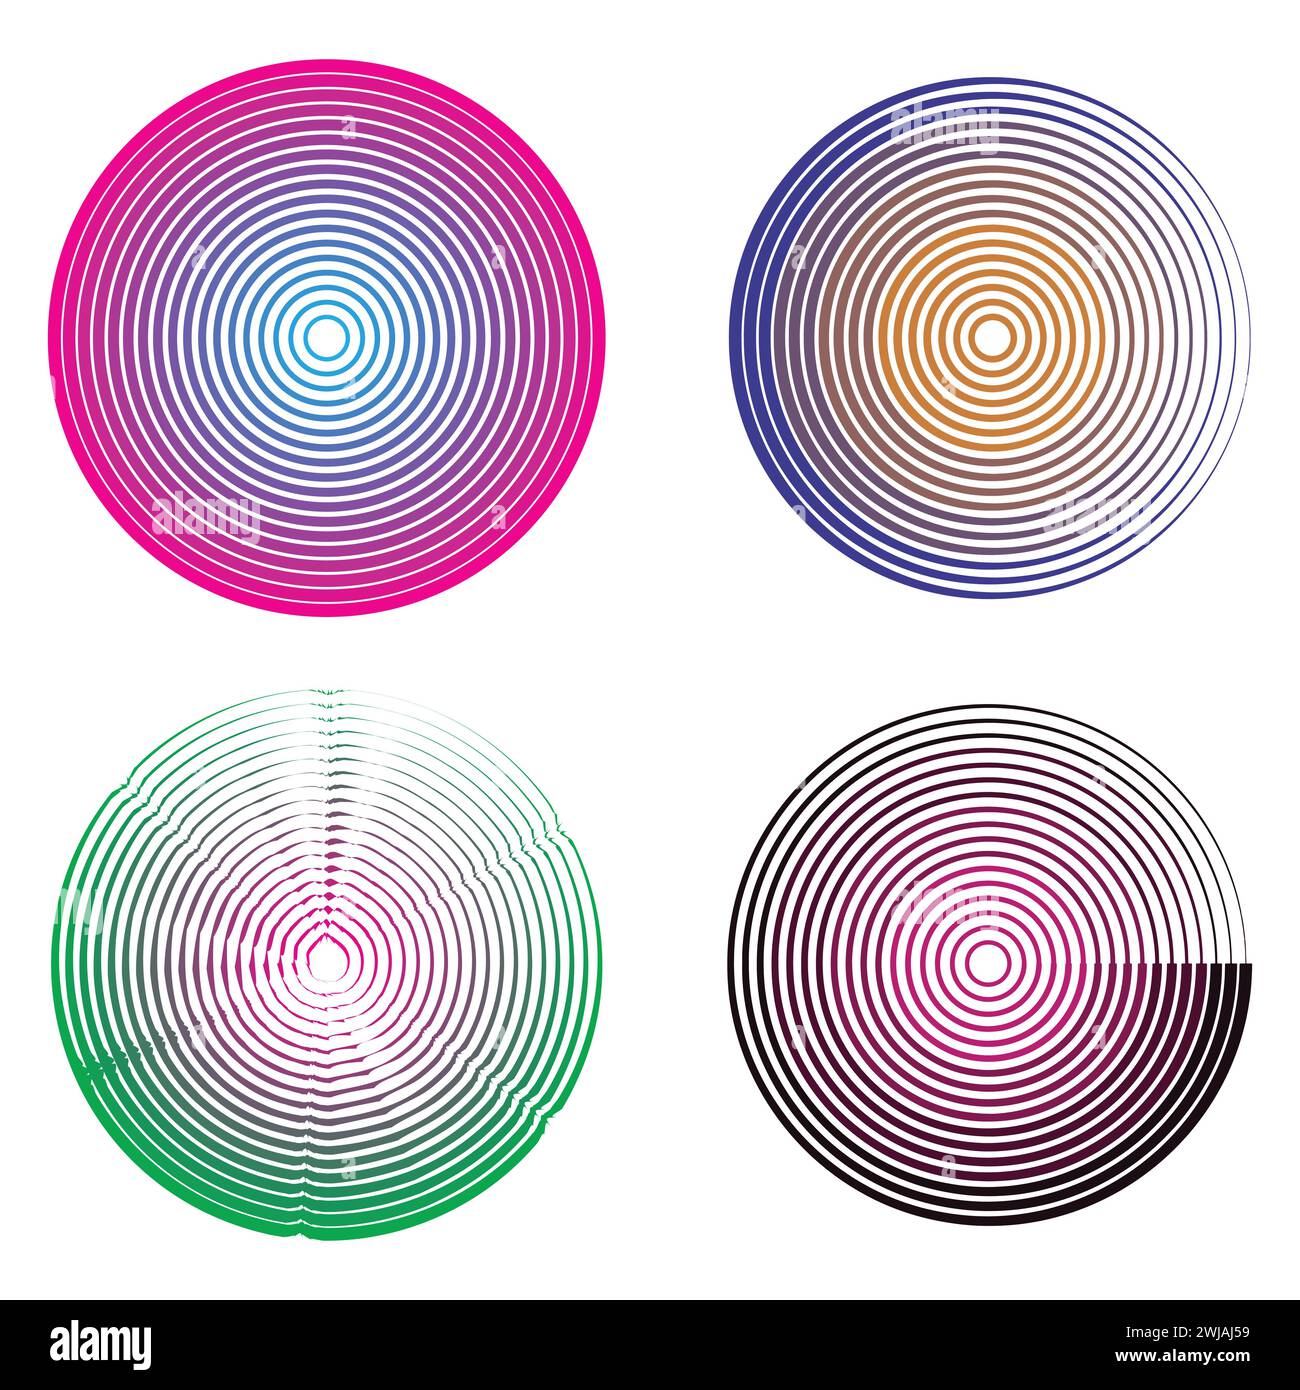 Concentric circle elements, spaced concentric circle, rings sound wave, line in a circle concept, black circular pattern. Stock Vector